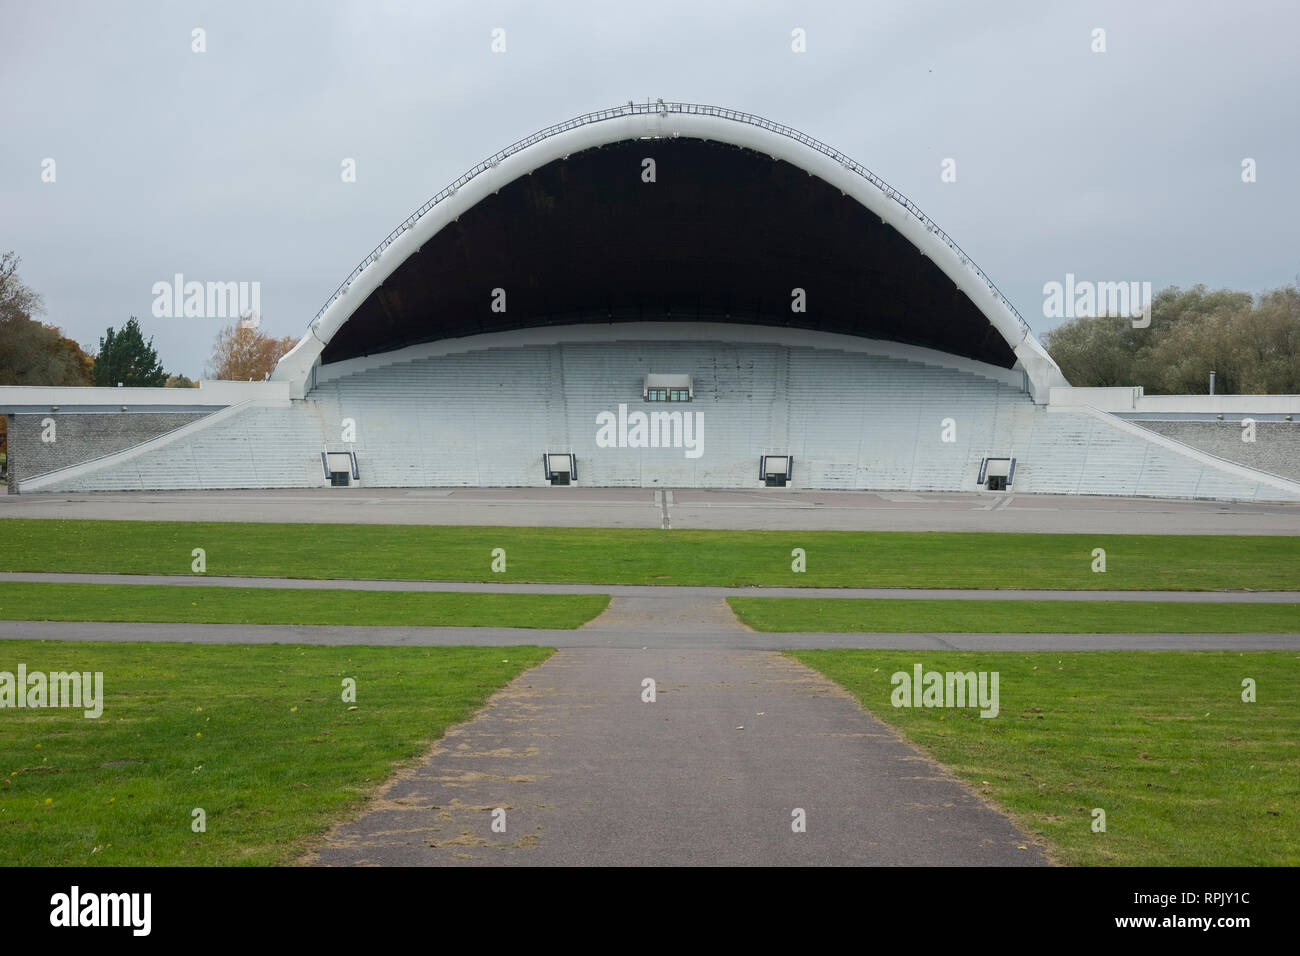 A view of the giant song festival ampitheater in Tallin, Estonia. Stock Photo